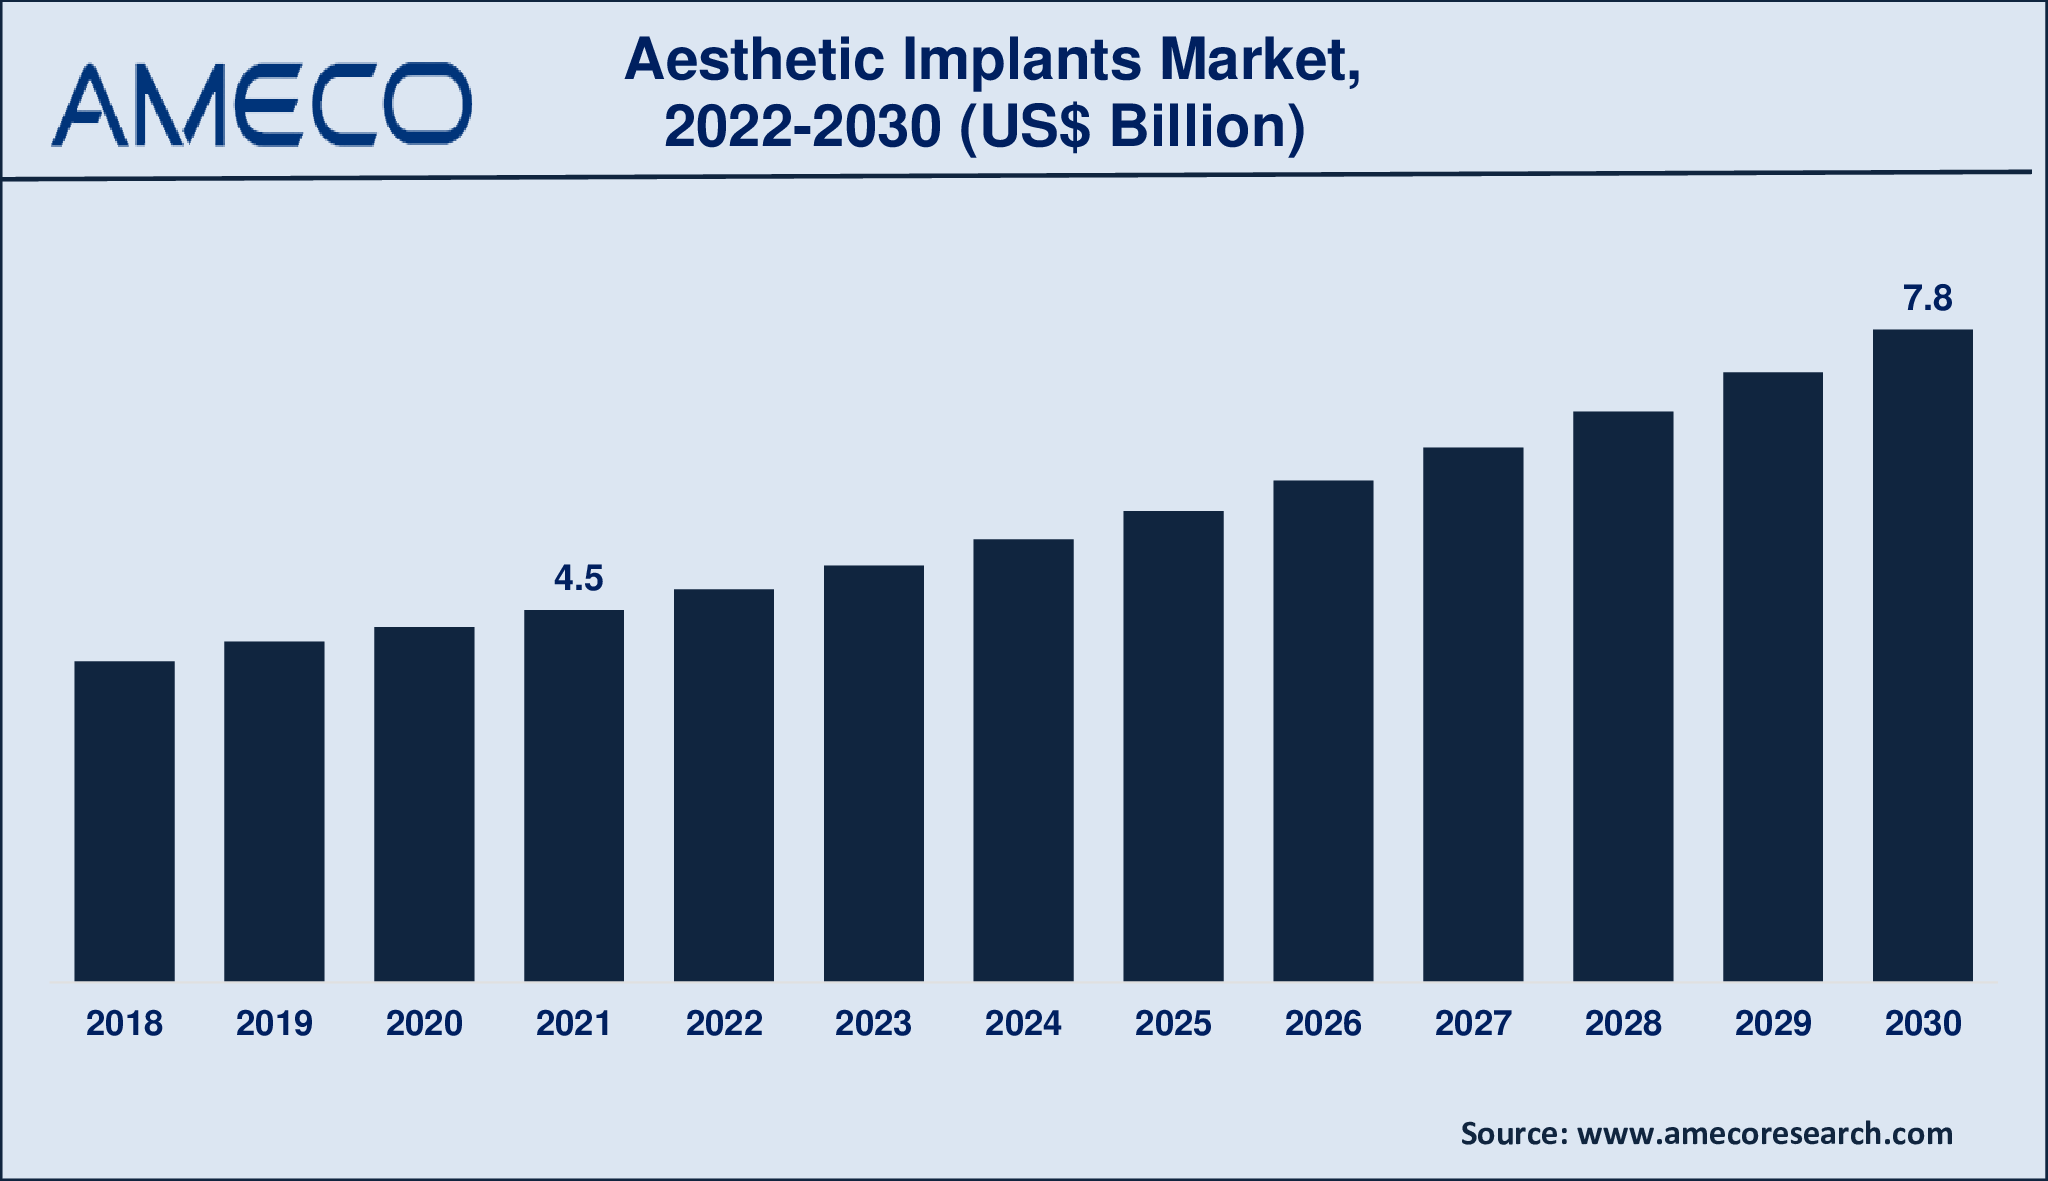 Aesthetic Implants Market Size, Share, Growth, Trends, and Forecast 2022-2030